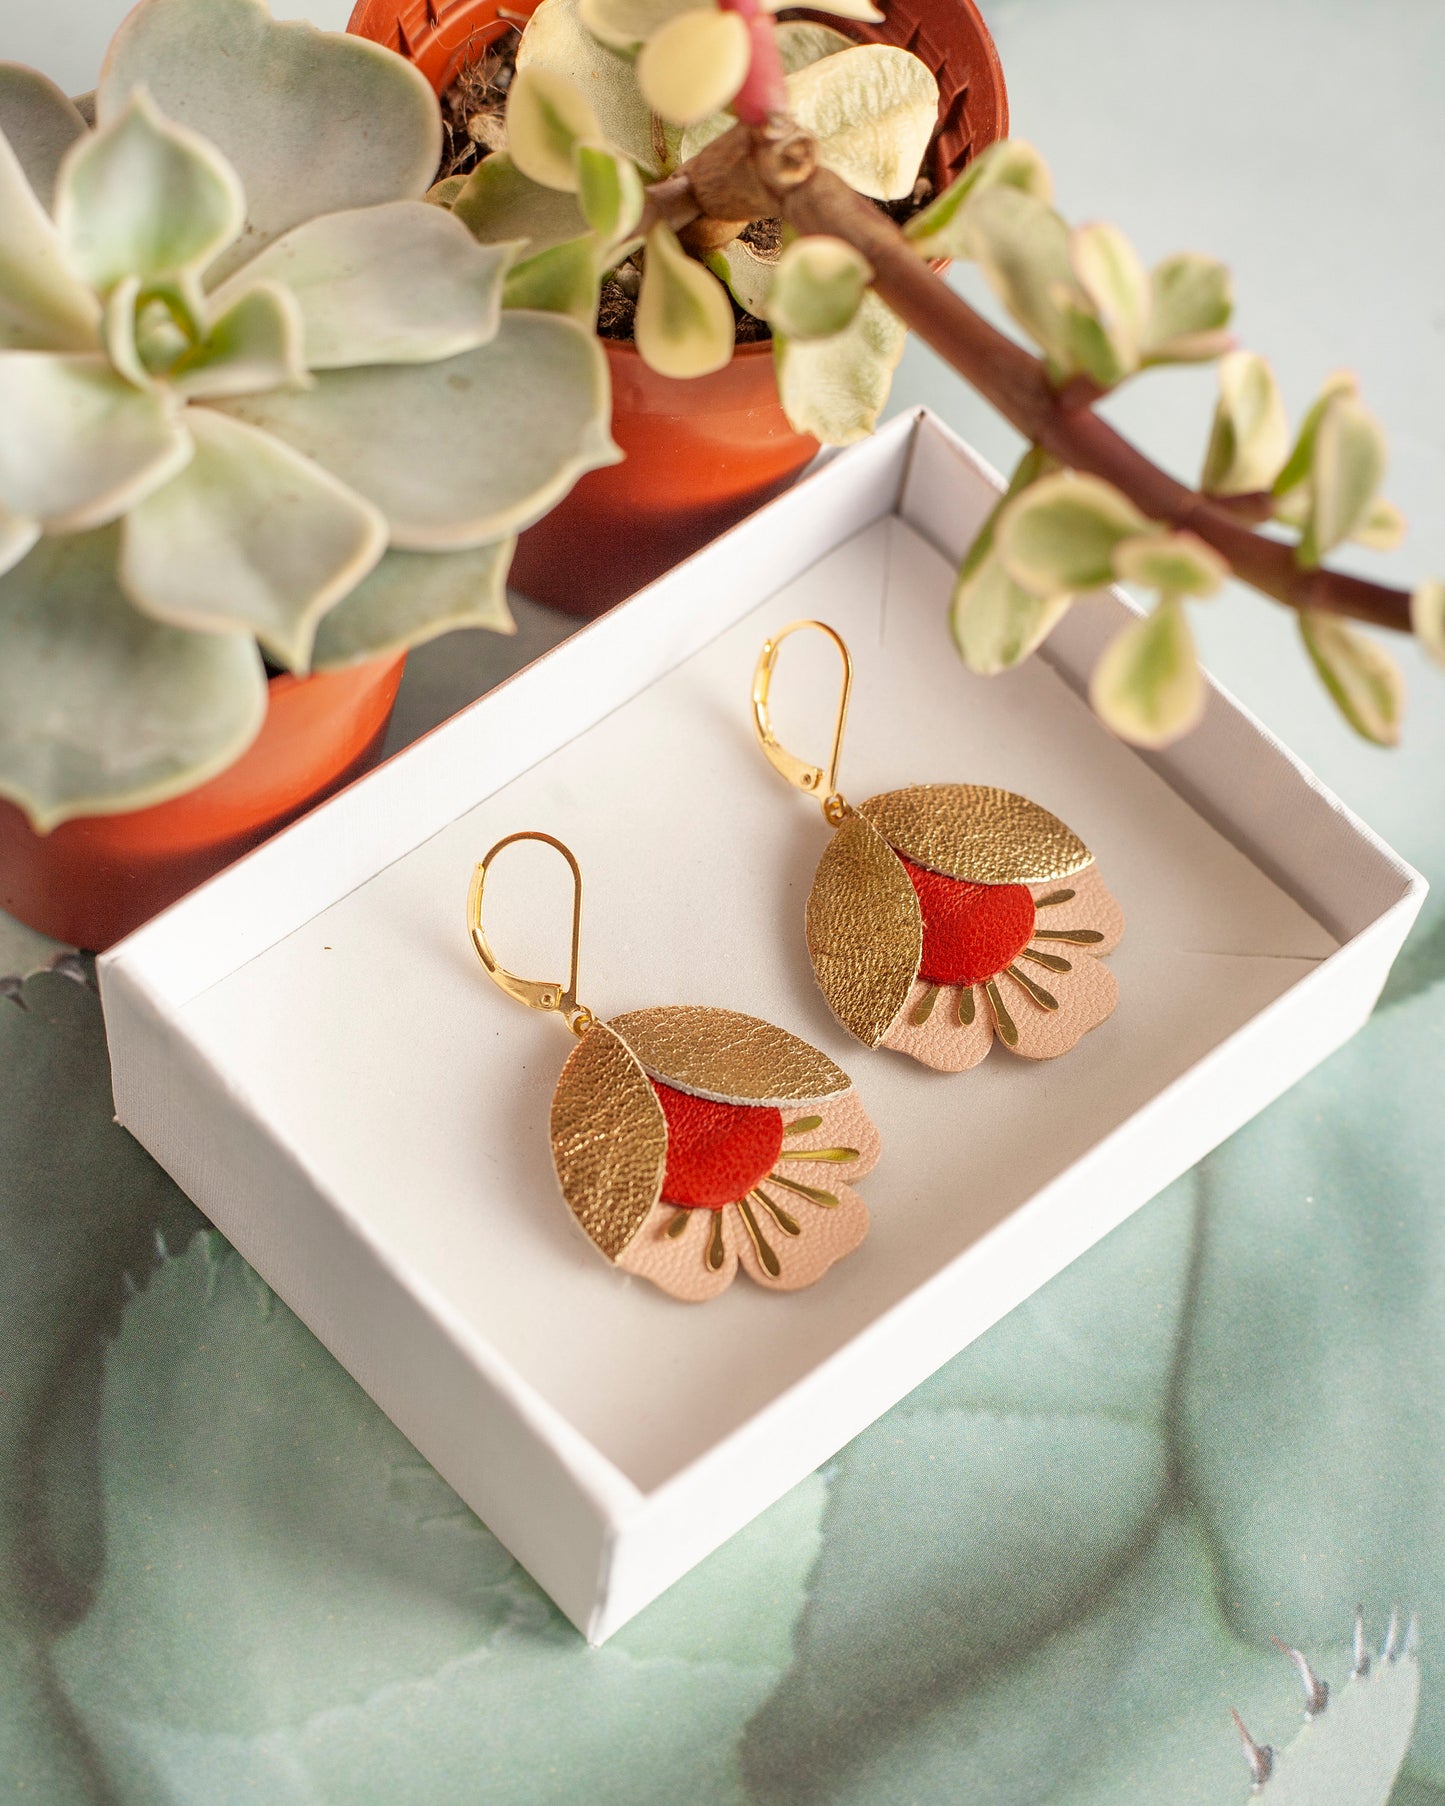 Cherry blossom earrings in red and pink gold leather